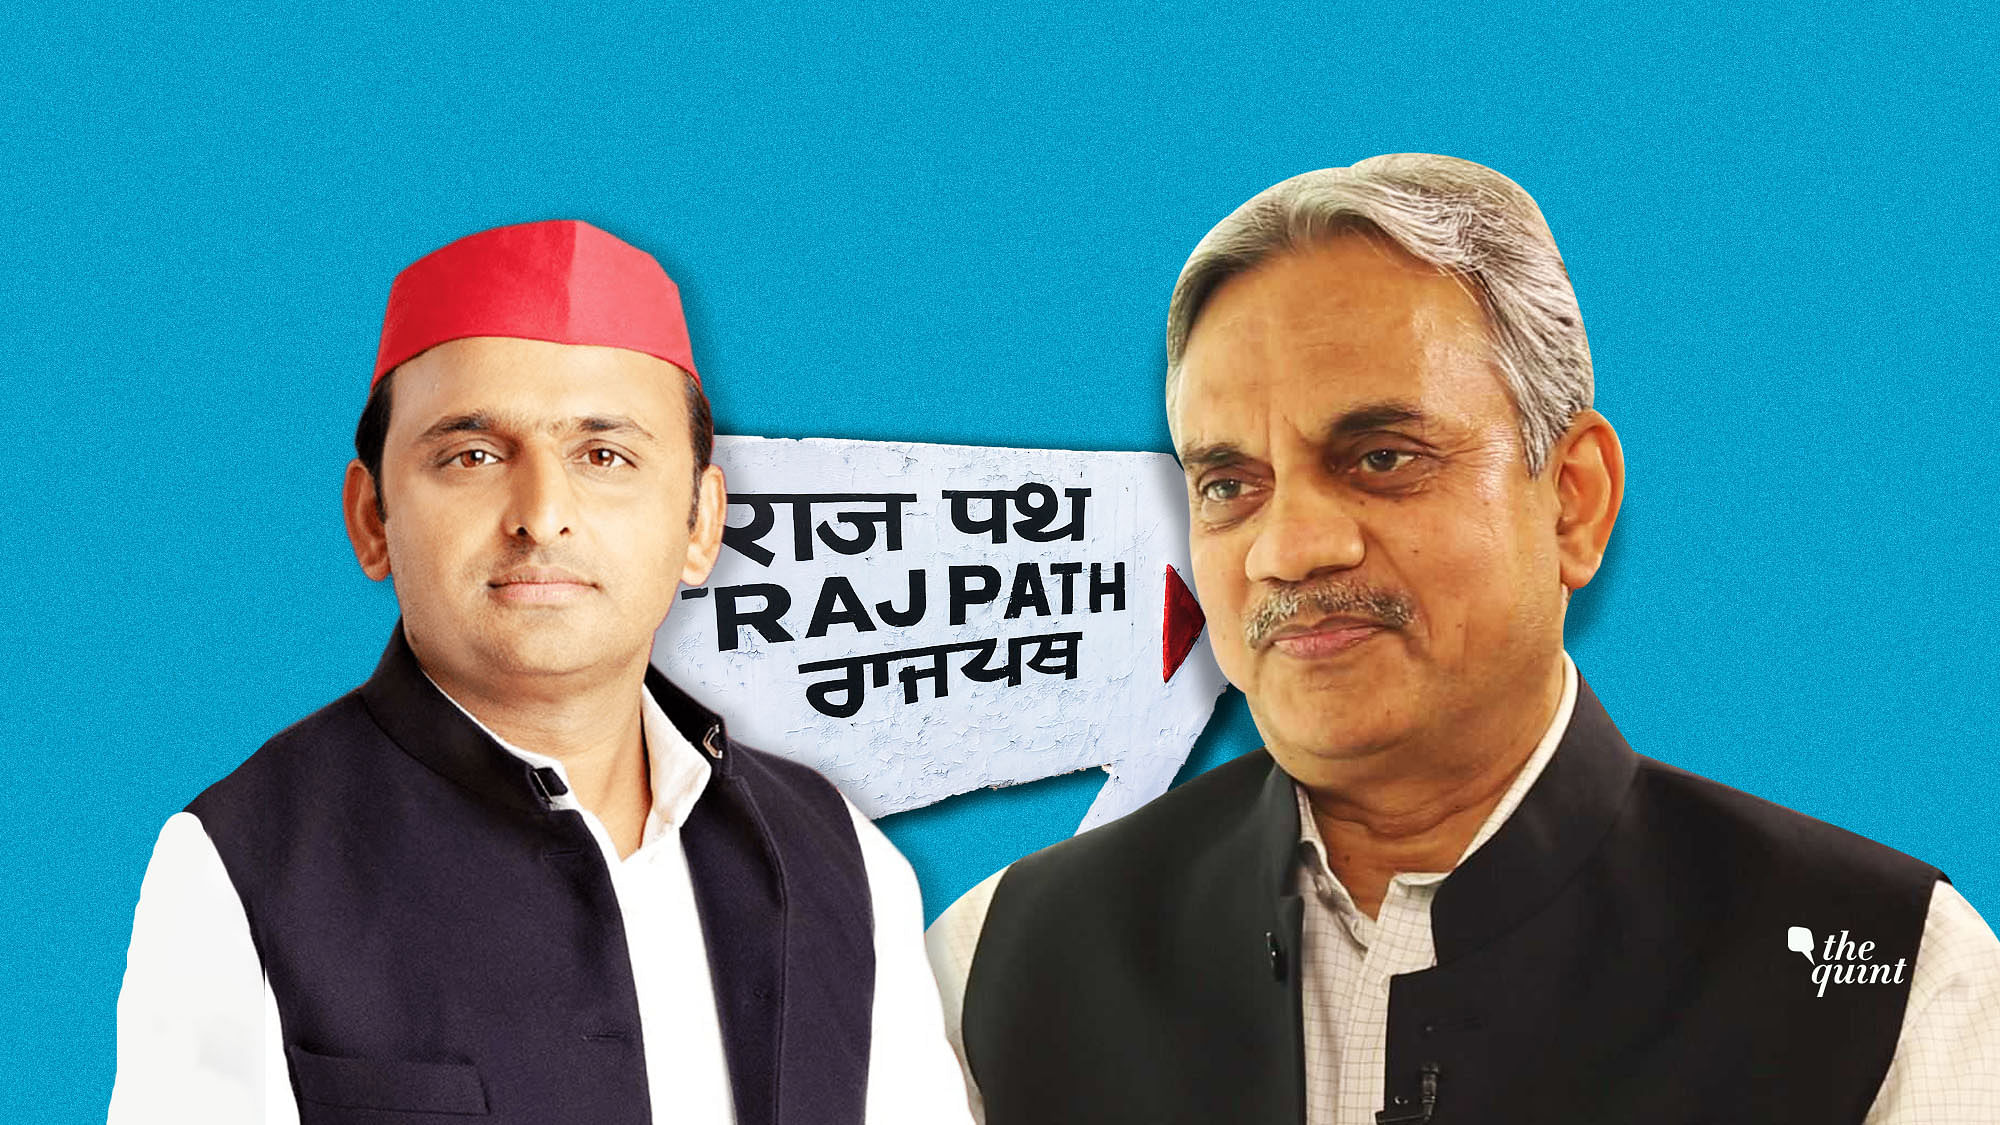 Akhilesh Yadav in an exclusive conversation with The Quint’s Editorial Director Sanjay Pugalia.